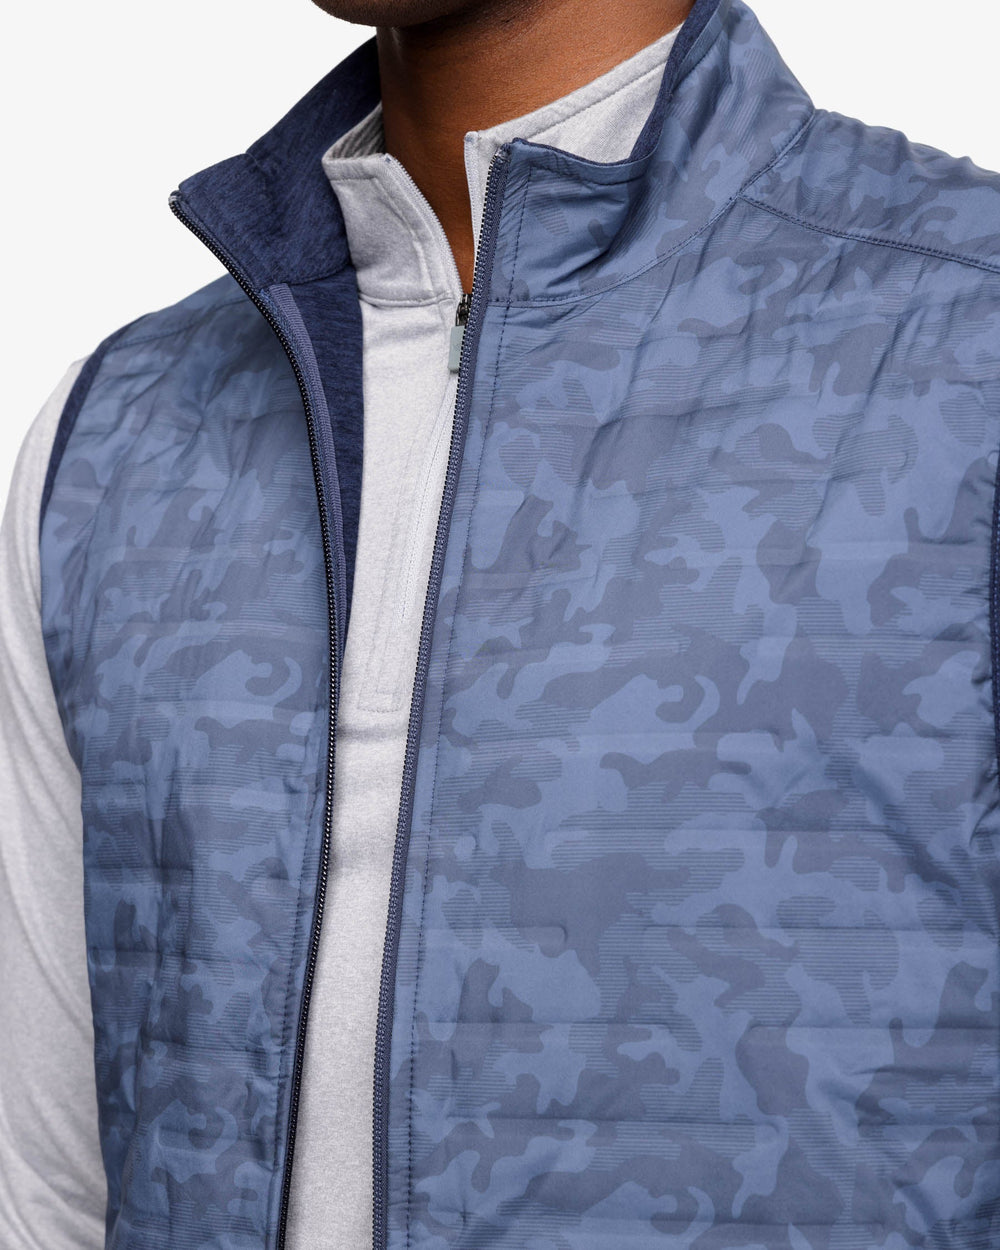 The front detail view of the Abercorn Camo Performance Vest by Southern Tide - True Navy